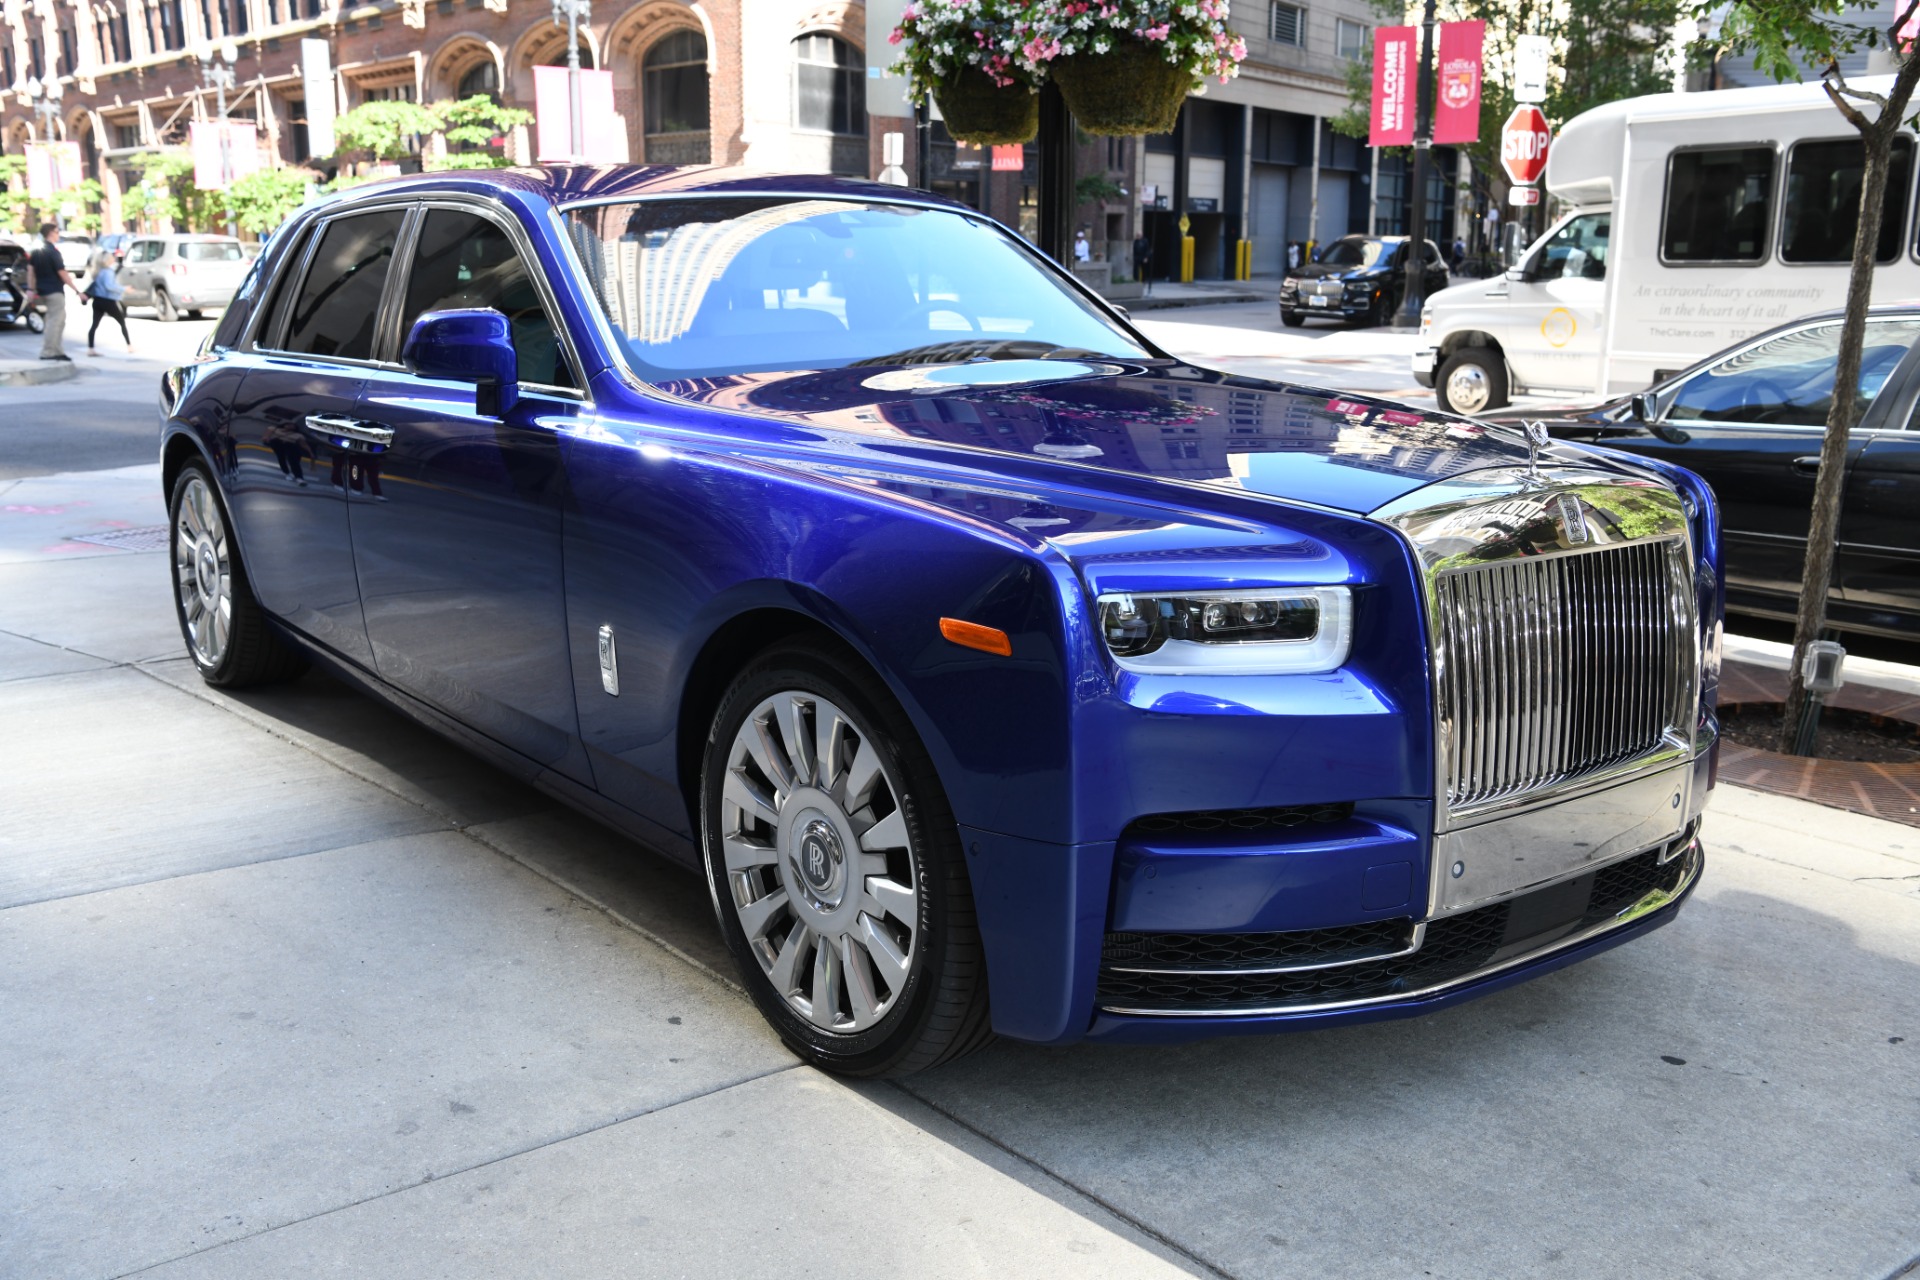 Five Facts about the RollsRoyce Phantom VIII You Need to Know